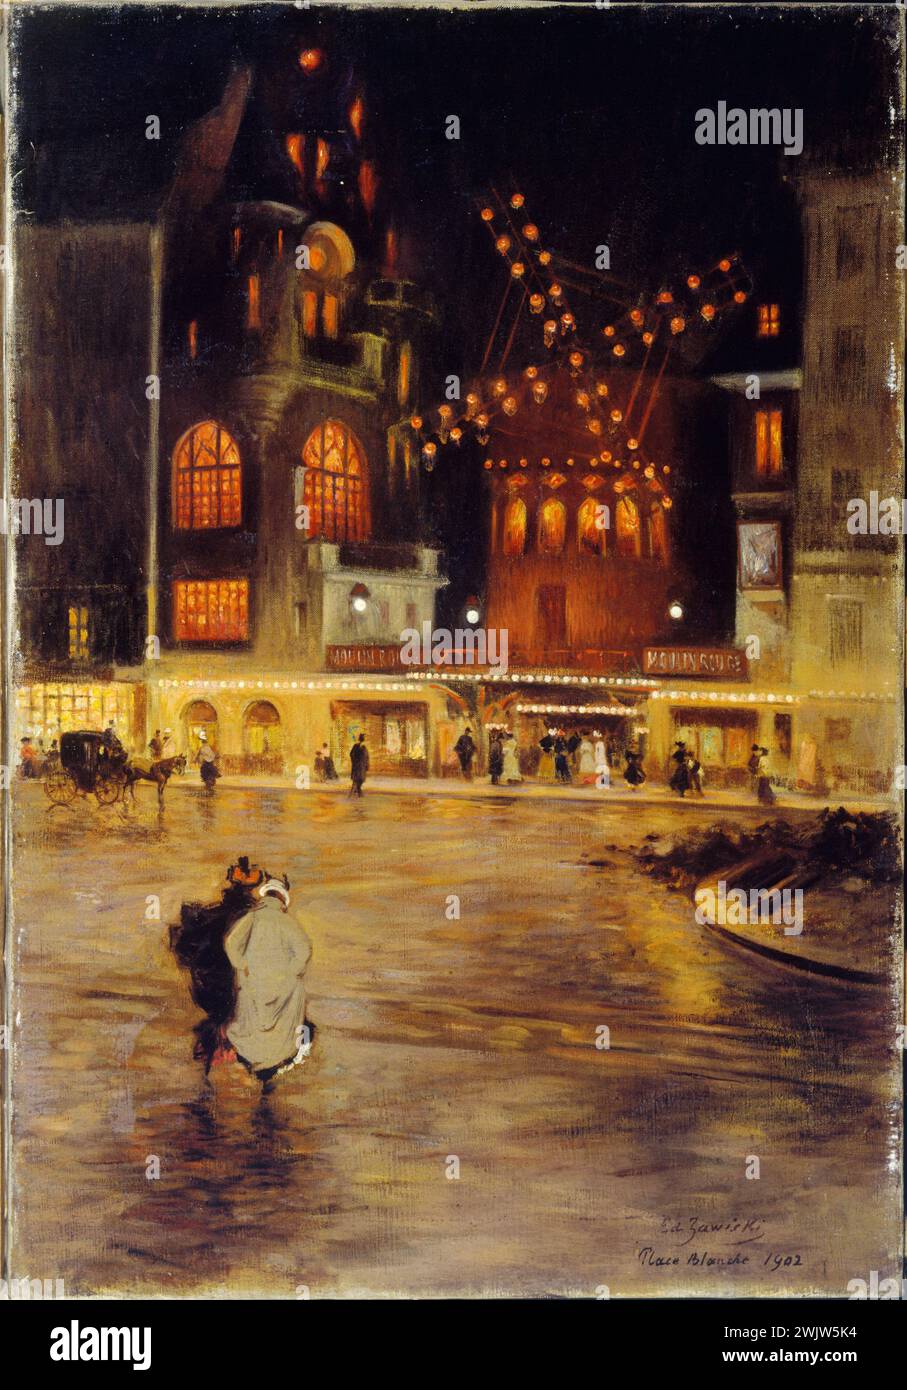 Edouard Zawiski (active late 19th century, early 19th century). 'The white square, the red mill, evening effect'. Oil on canvas, 1902. Paris, Carnavalet museum. 36492-1 Cabaret, night, woman, yellow, electric light, walking, Montmartre, monument, Moulin Rouge, Music-Hall, work of art, Passing, Pieton, Place Blanche, Place Public, Rue, Performance, Scene of life, Urban scene, painting, nightlife, night view, city, 19th 19th 19th 19th 19th 19th century, oil on canvas, Illumination Stock Photo